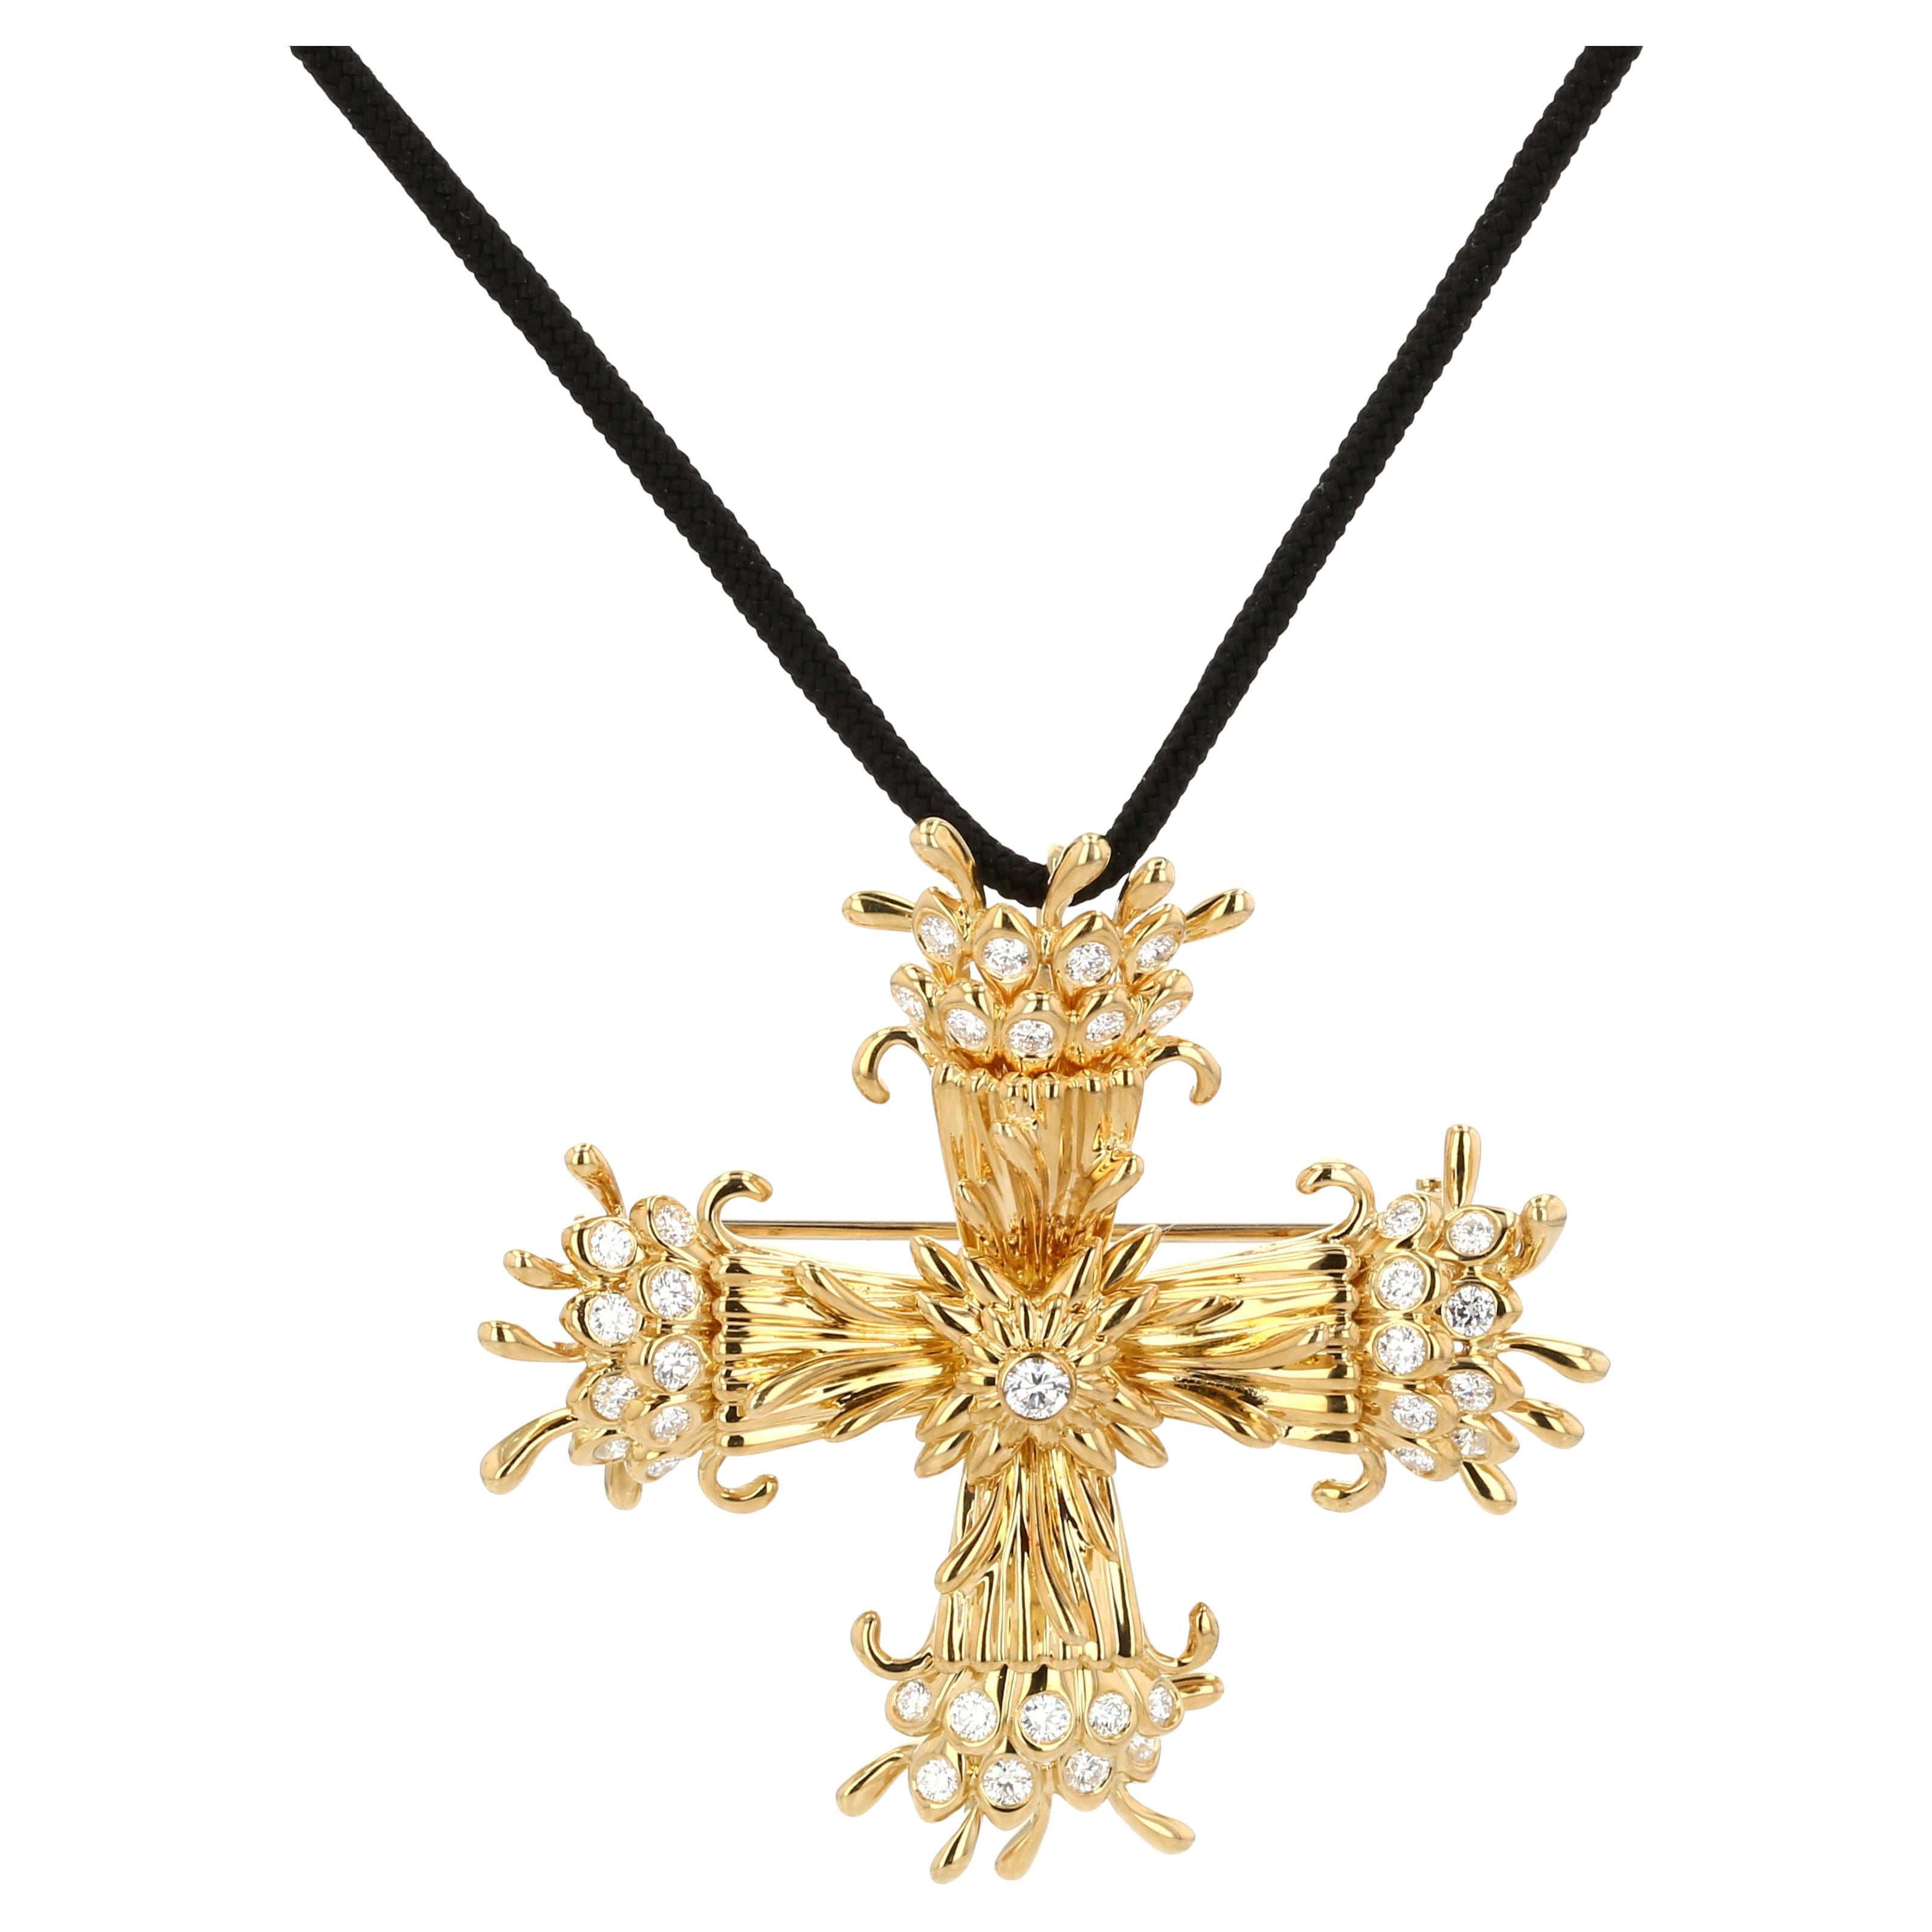 Jean Schlumberger for Tiffany & Co. 'Maltese Cross' Gold and Diamond Clip